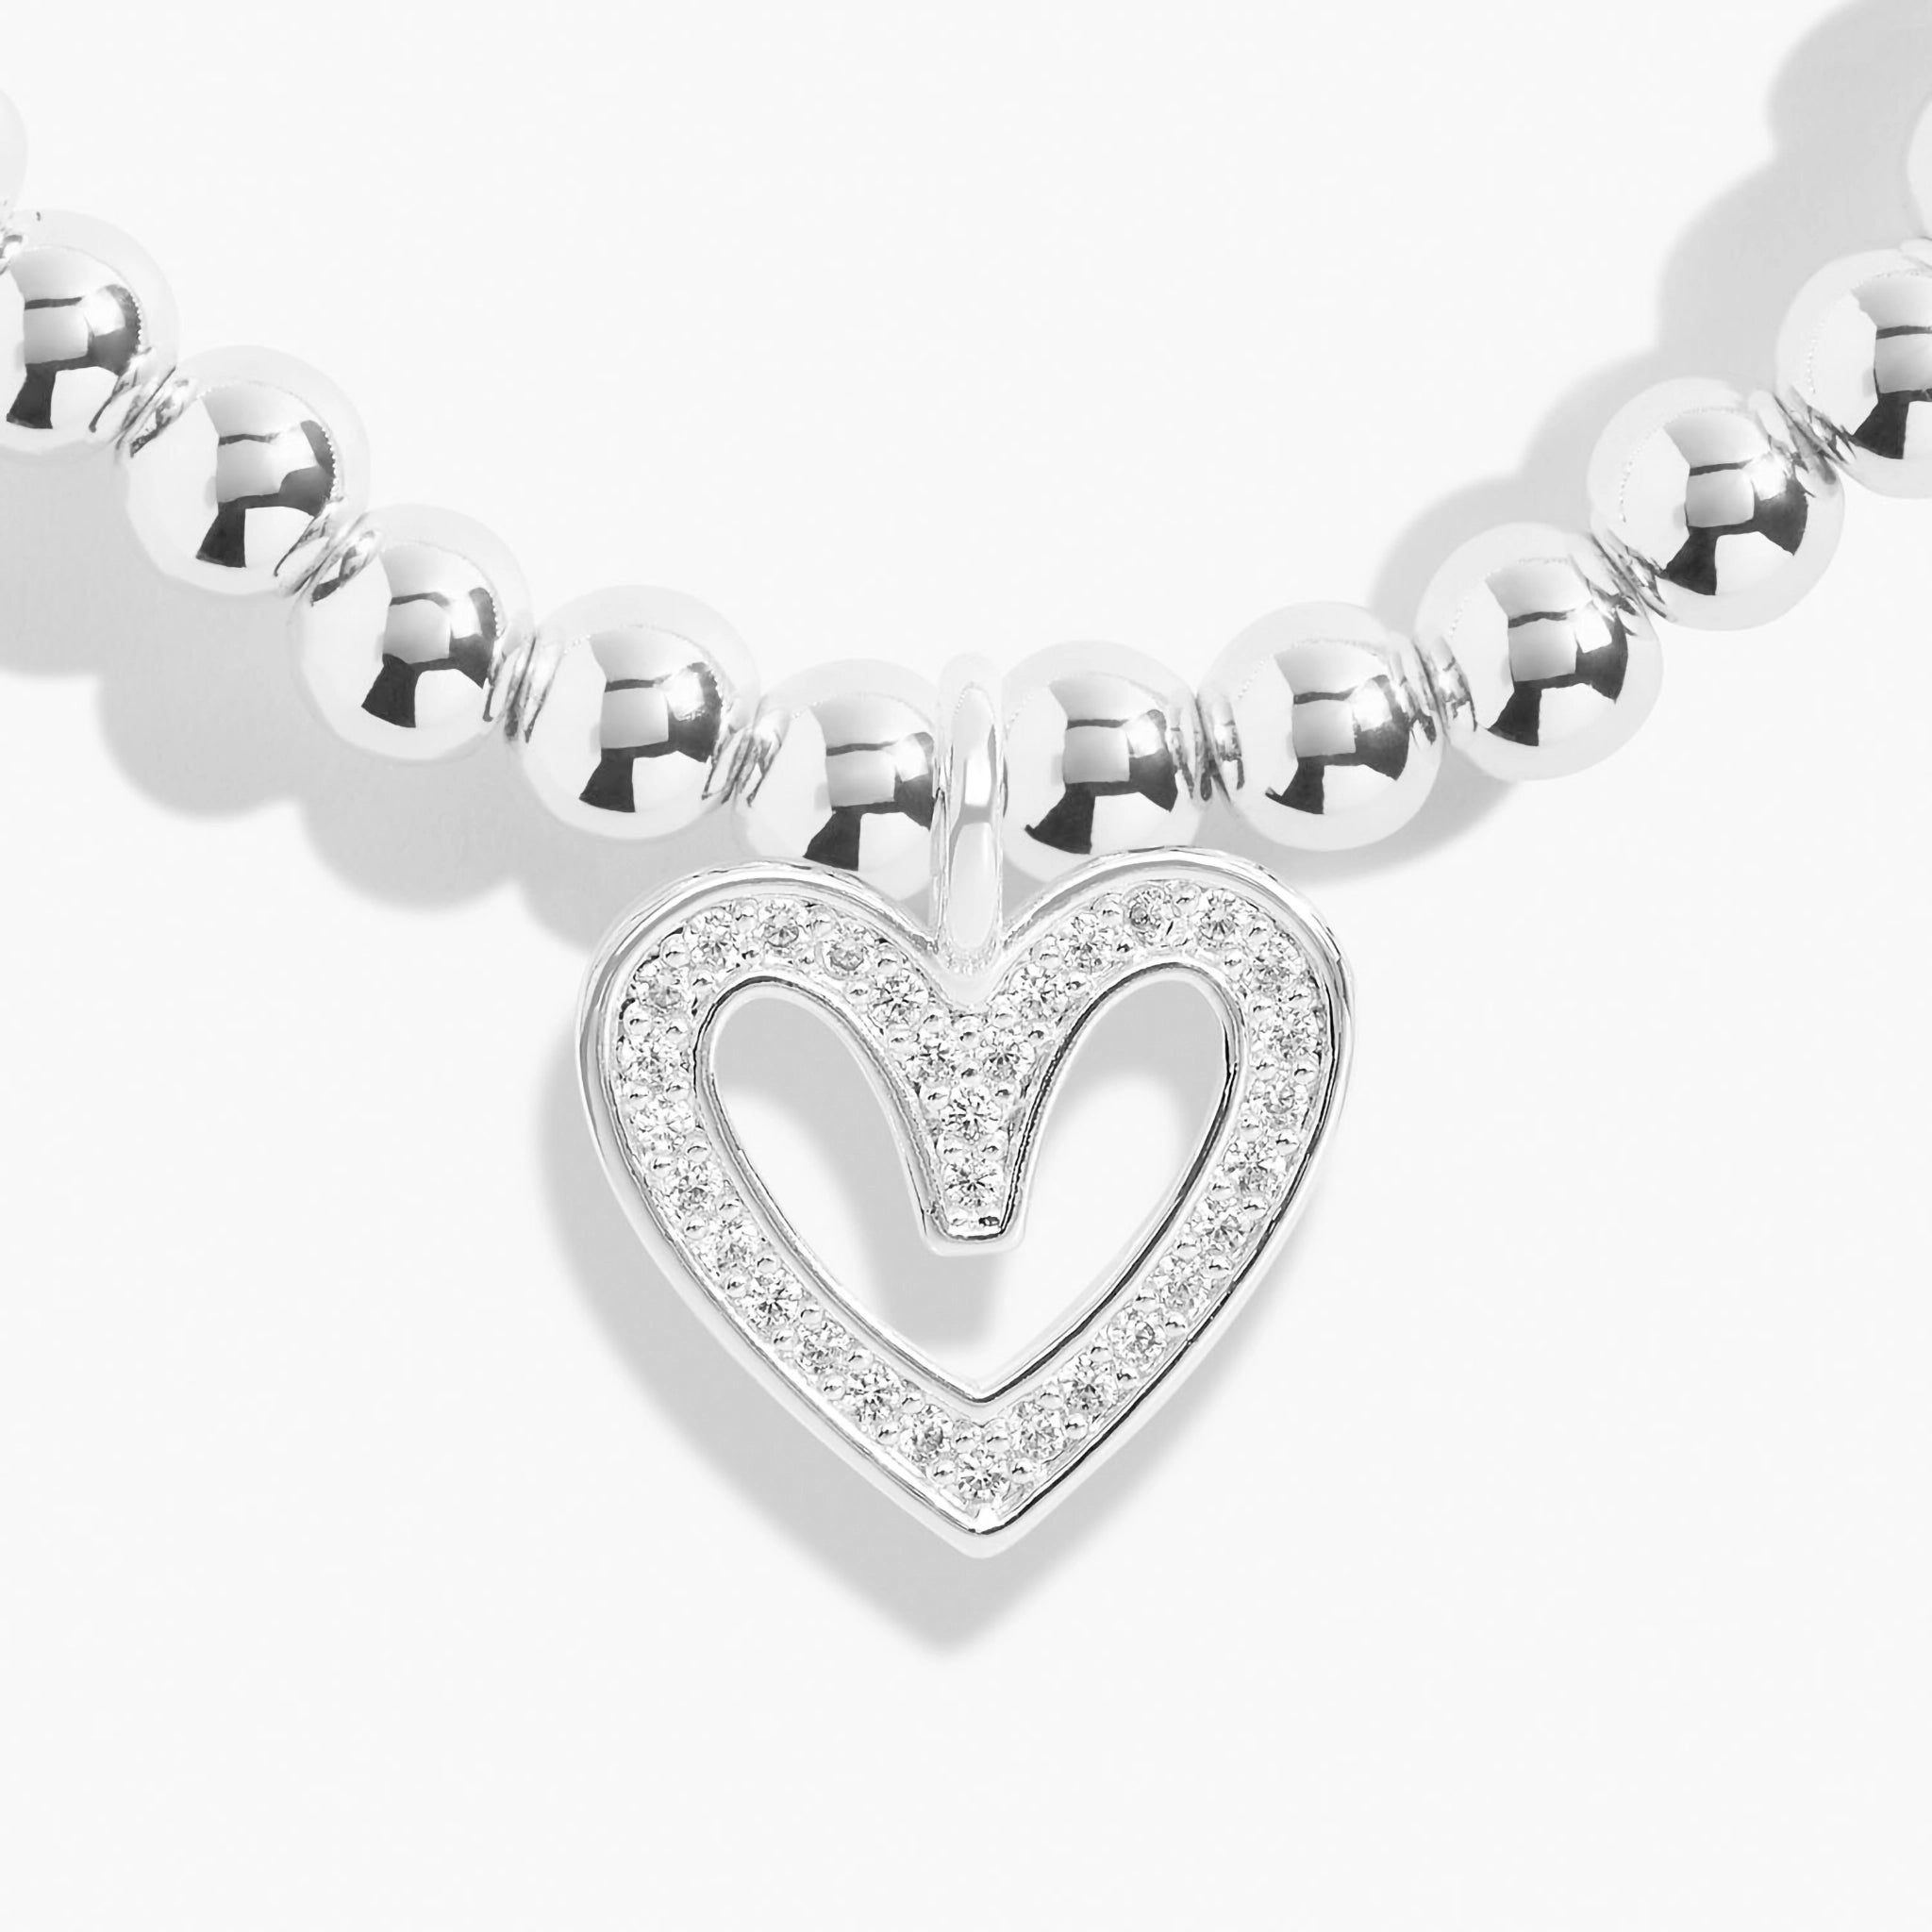 Detailed image of a silver beaded bracelet with a CZ open heart charm